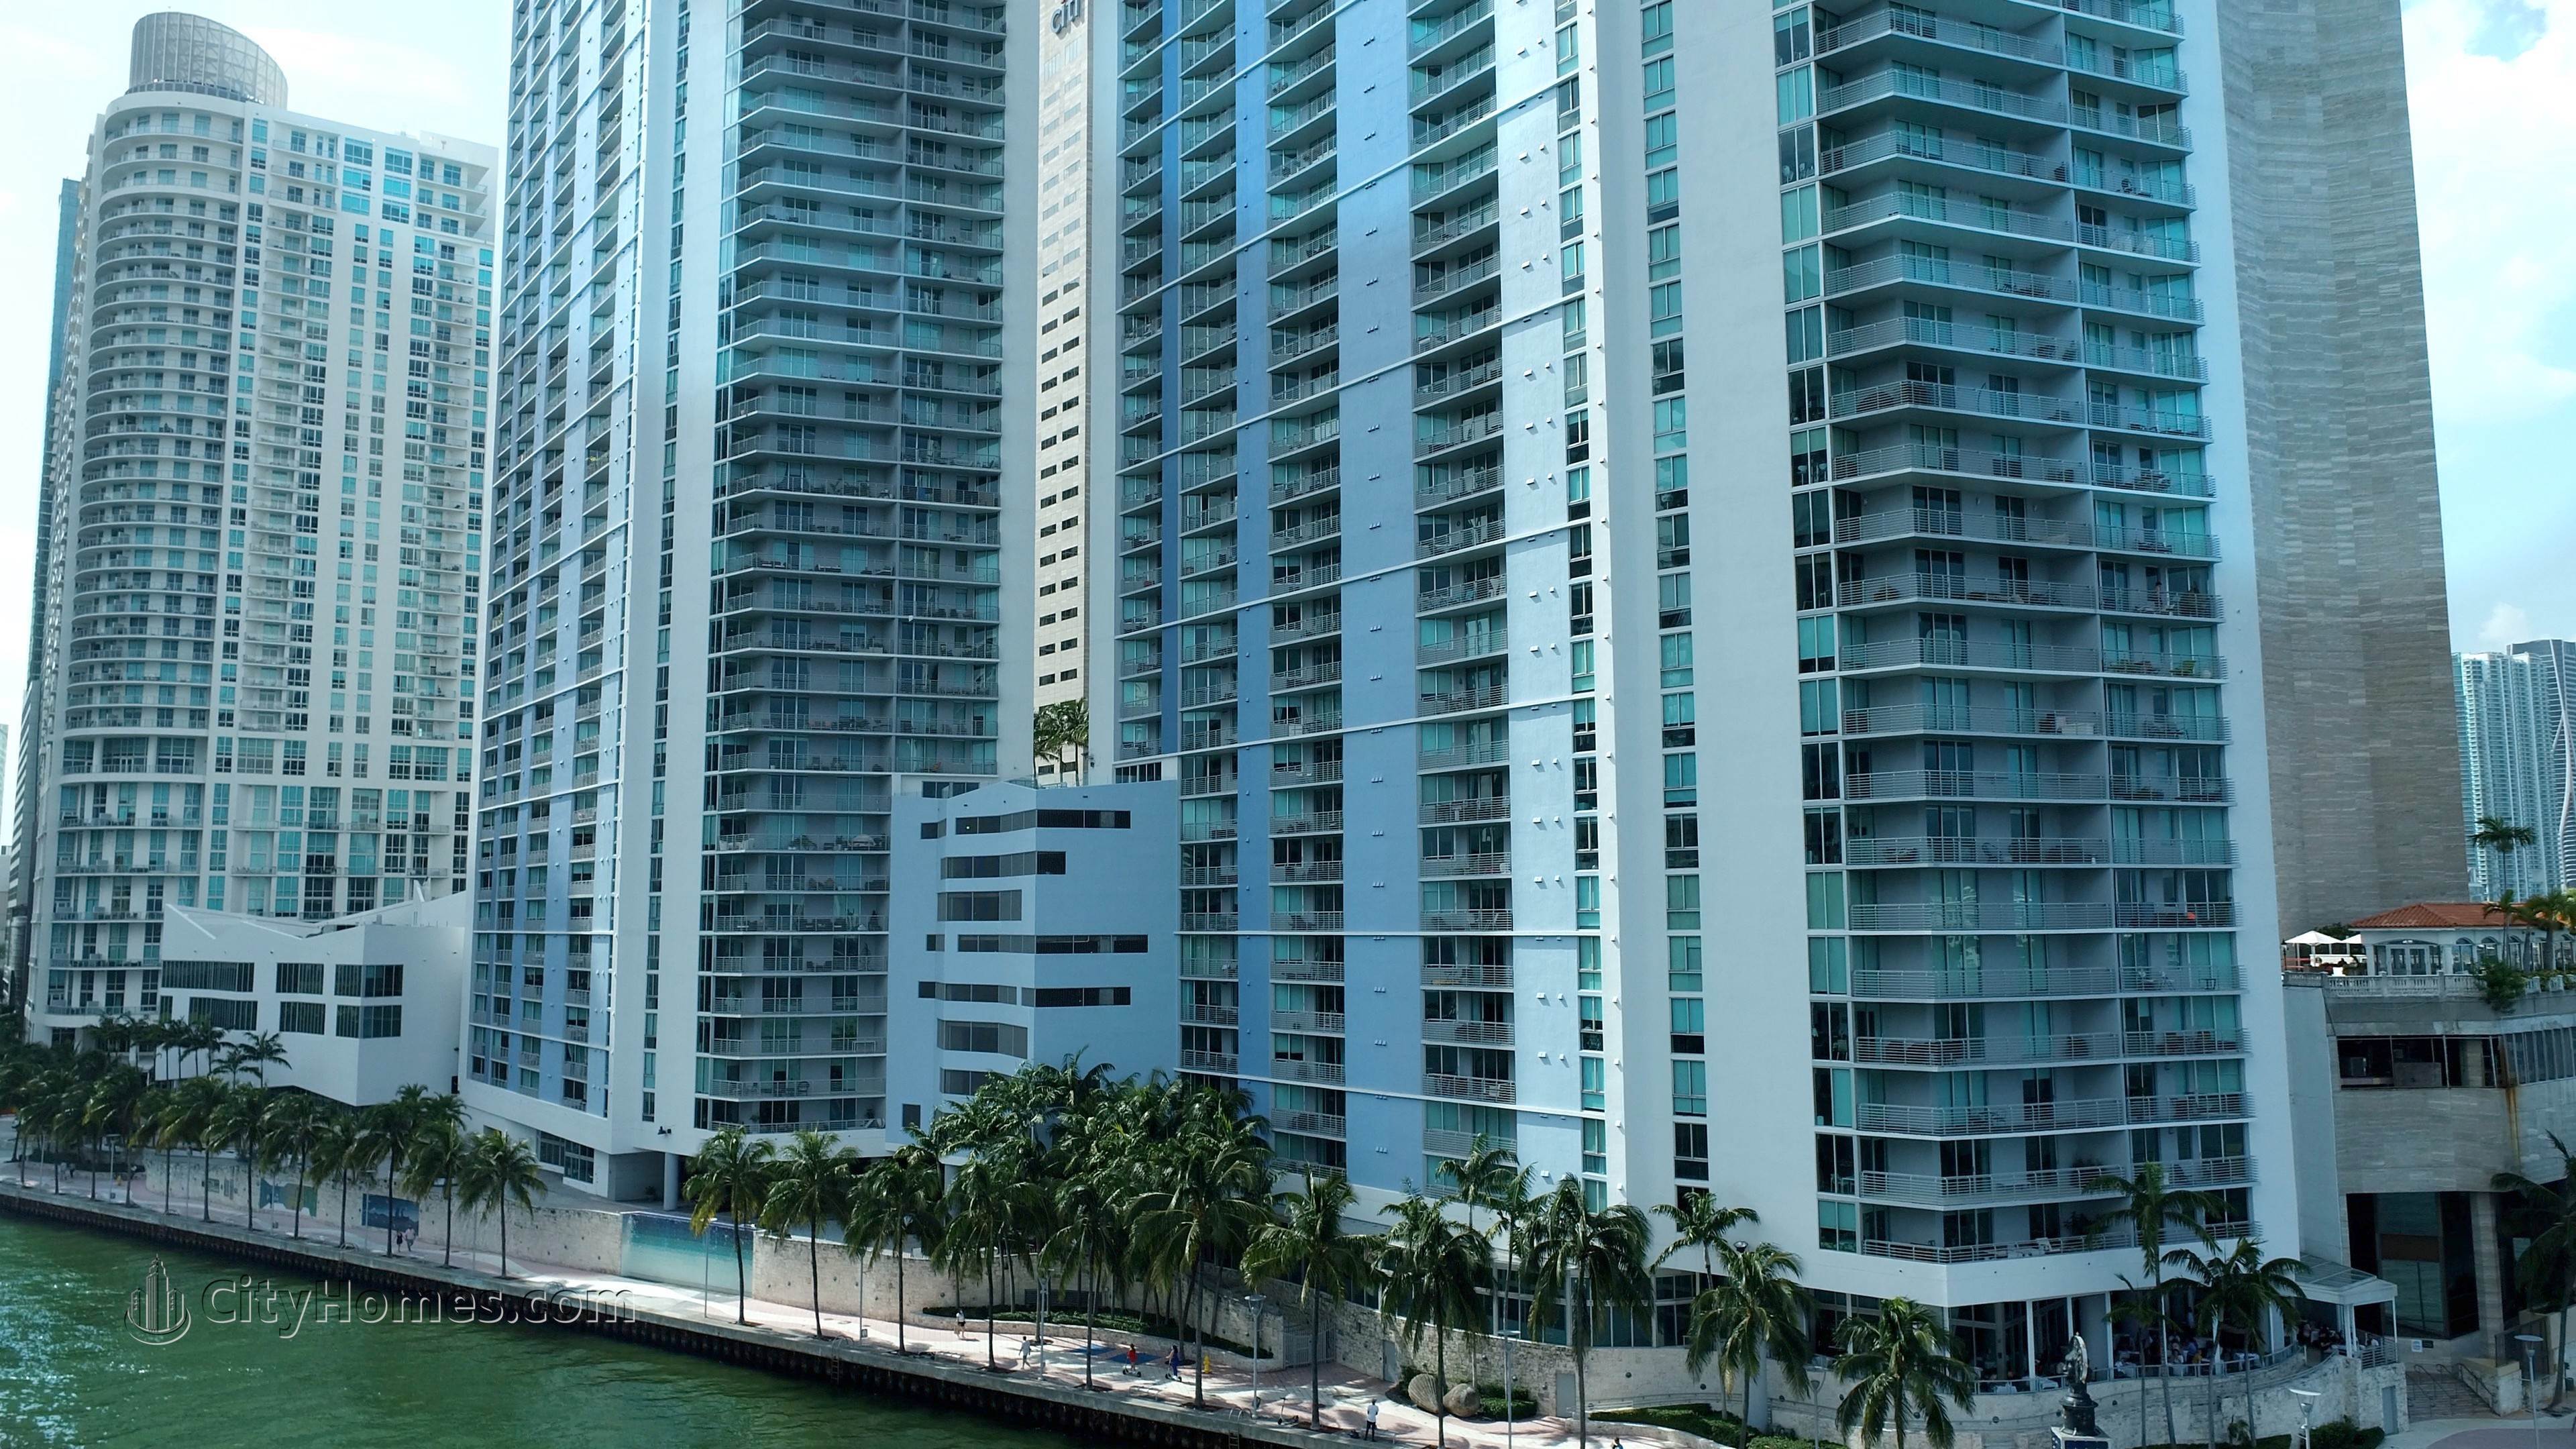 One Miami building at 325 And 335 S Biscayne Blvd, Miami, FL 33131